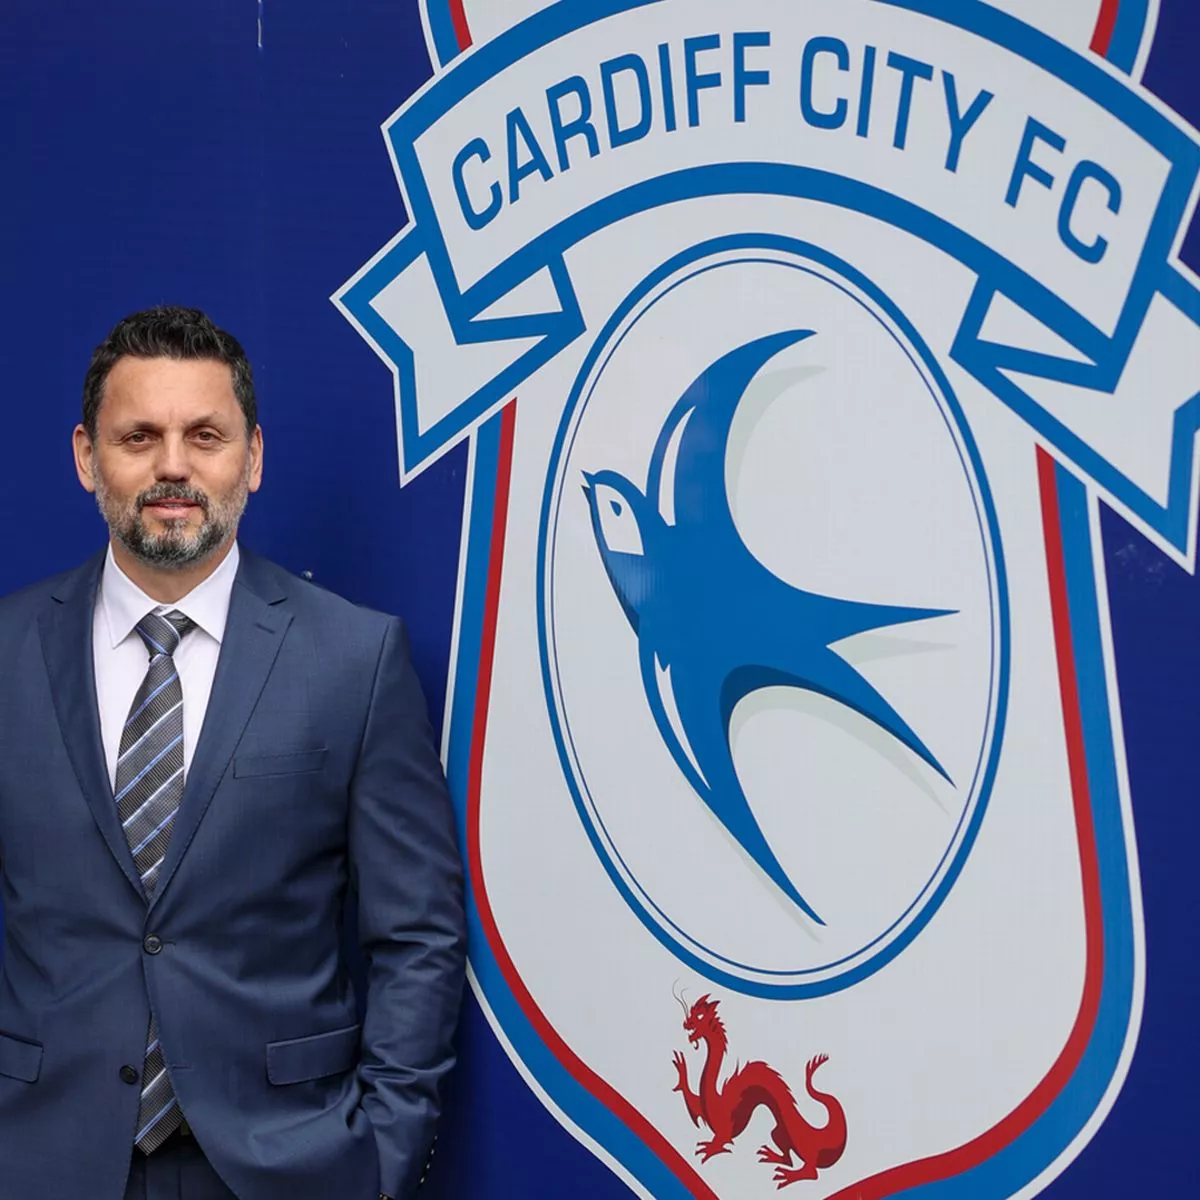 Cardiff City in talks with talented star over new contract amid stunning surge in form….